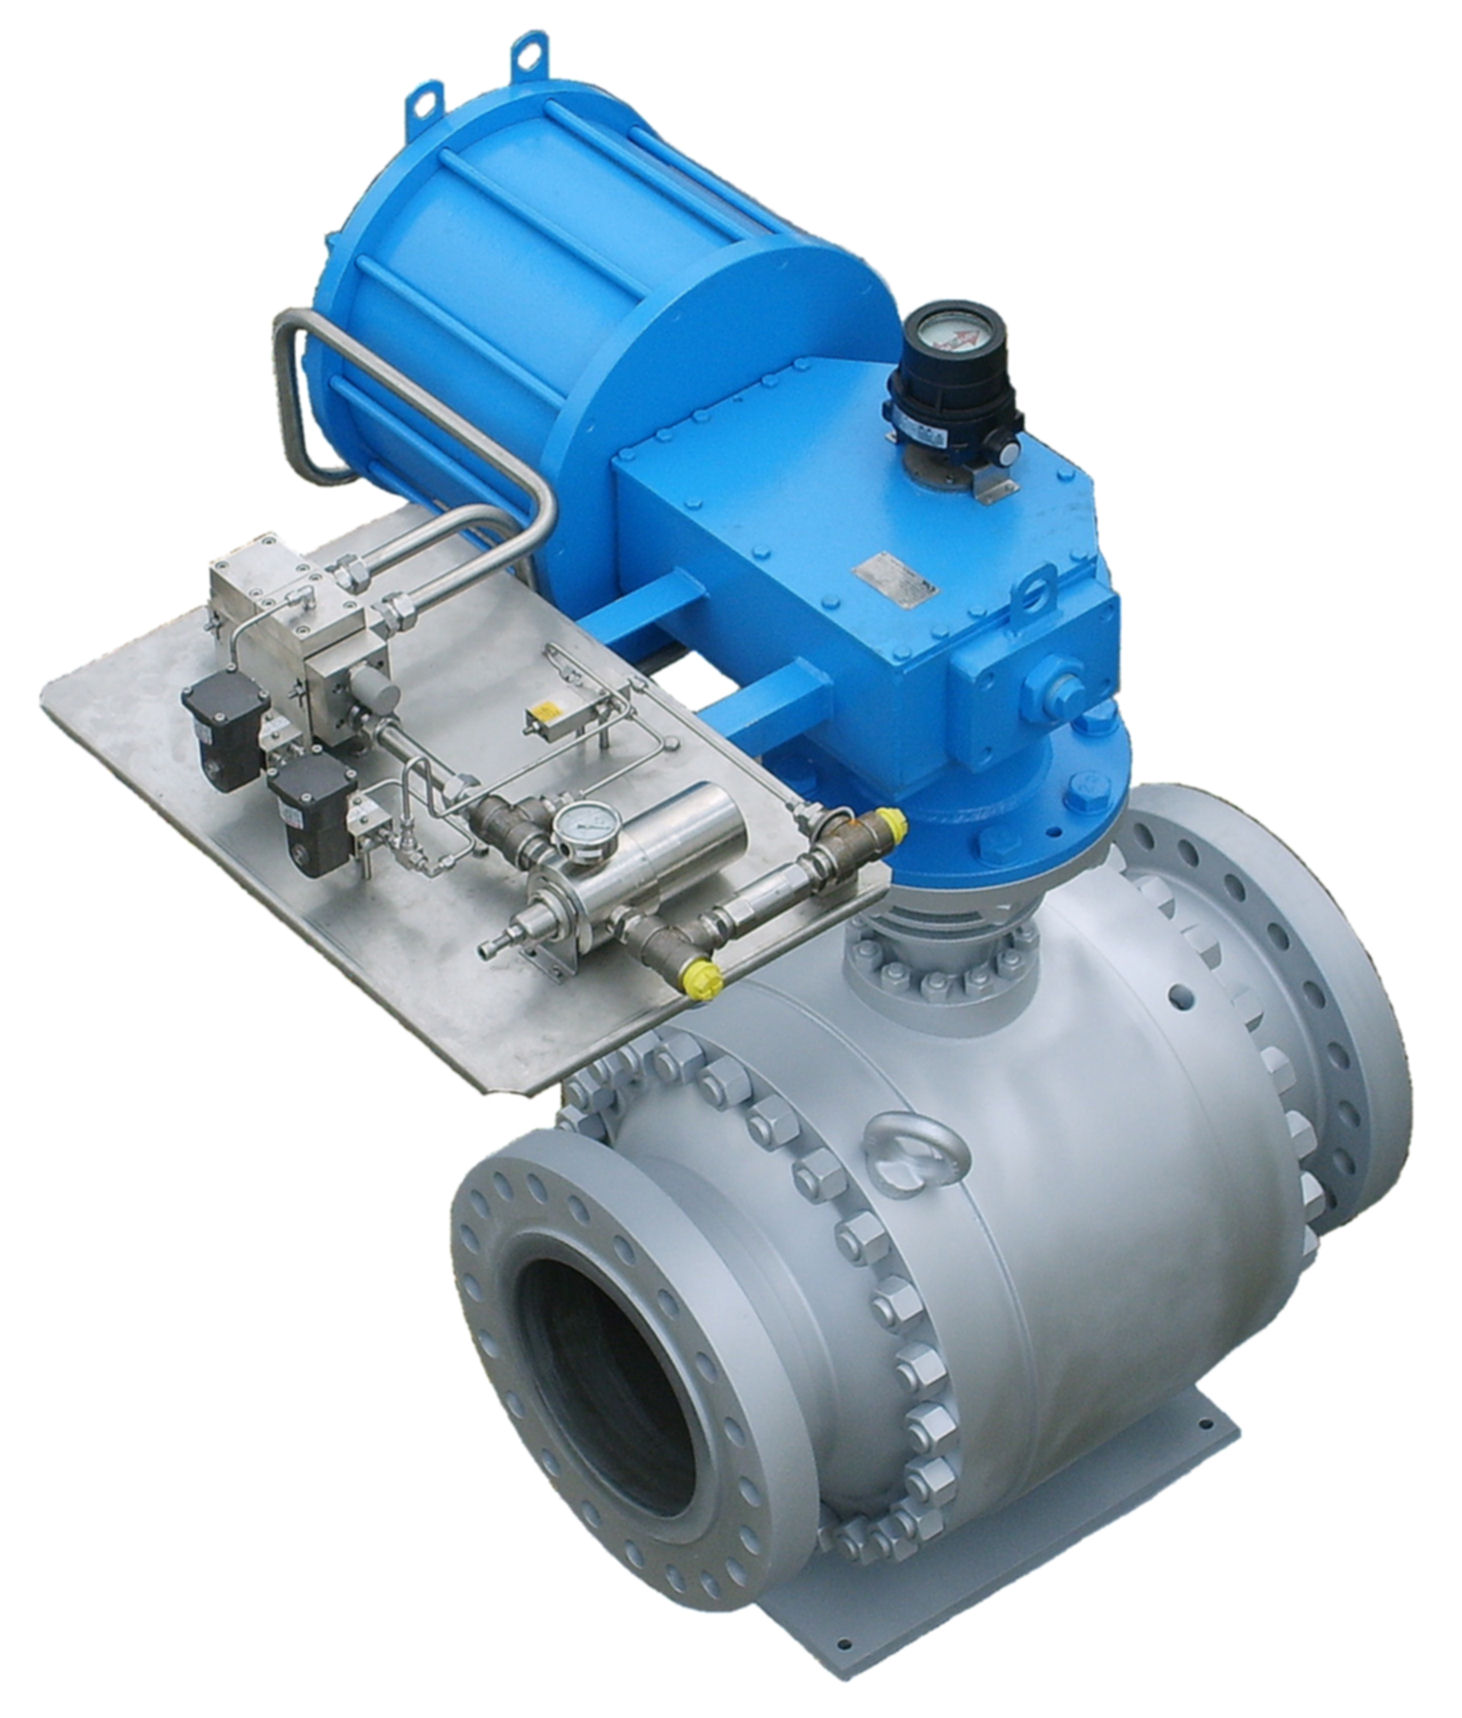 True metal seated ball valve for high temperature application mounted with Scotch-Yoke actuator